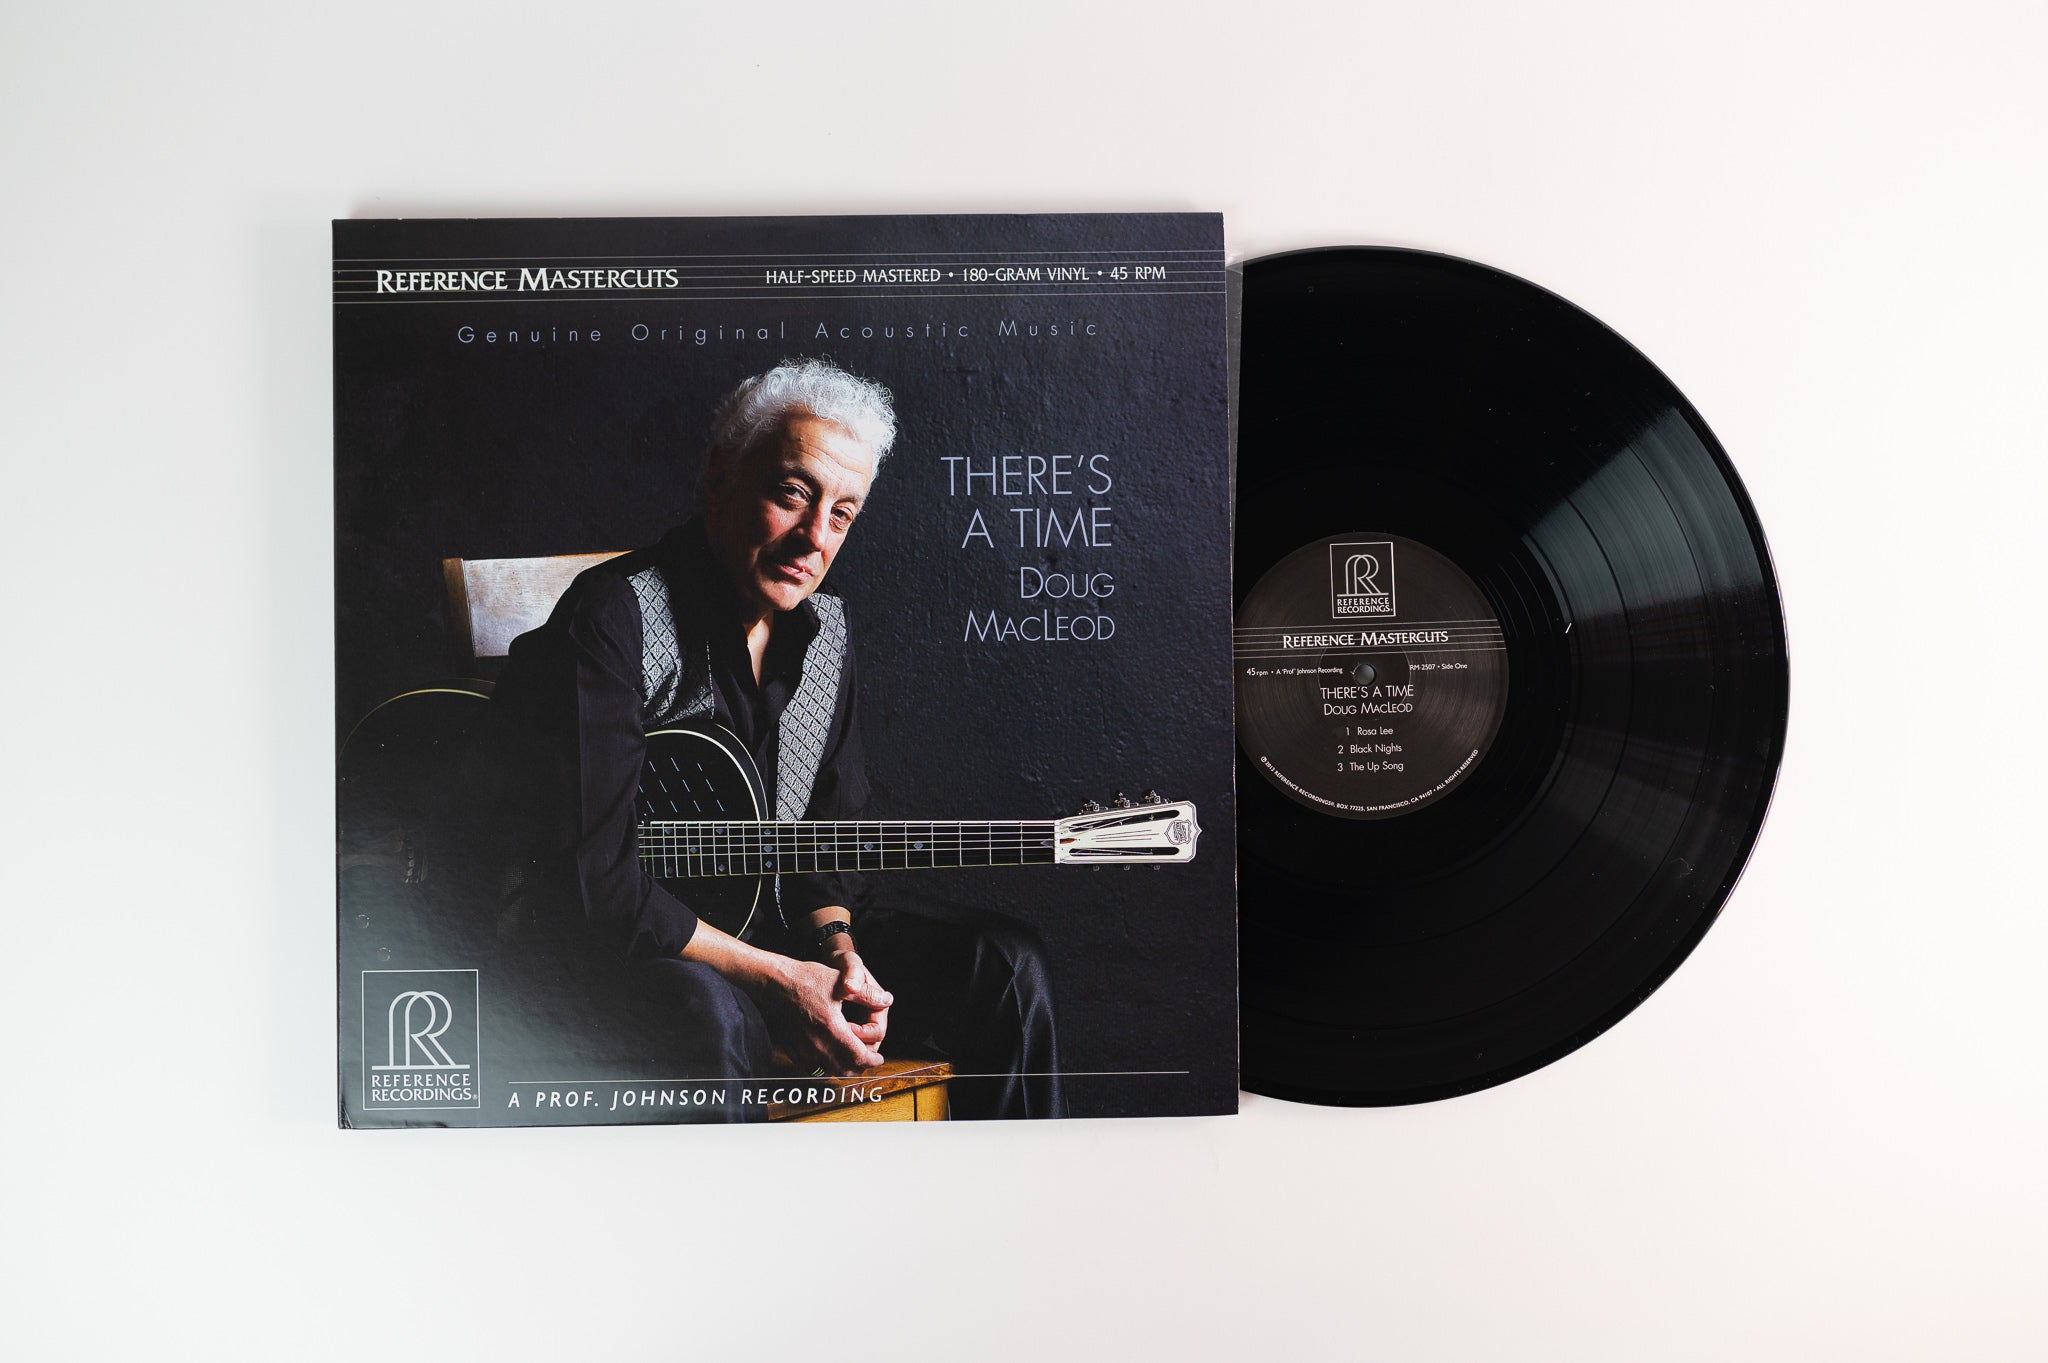 Doug MacLeod - There's A Time on Reference Recordings